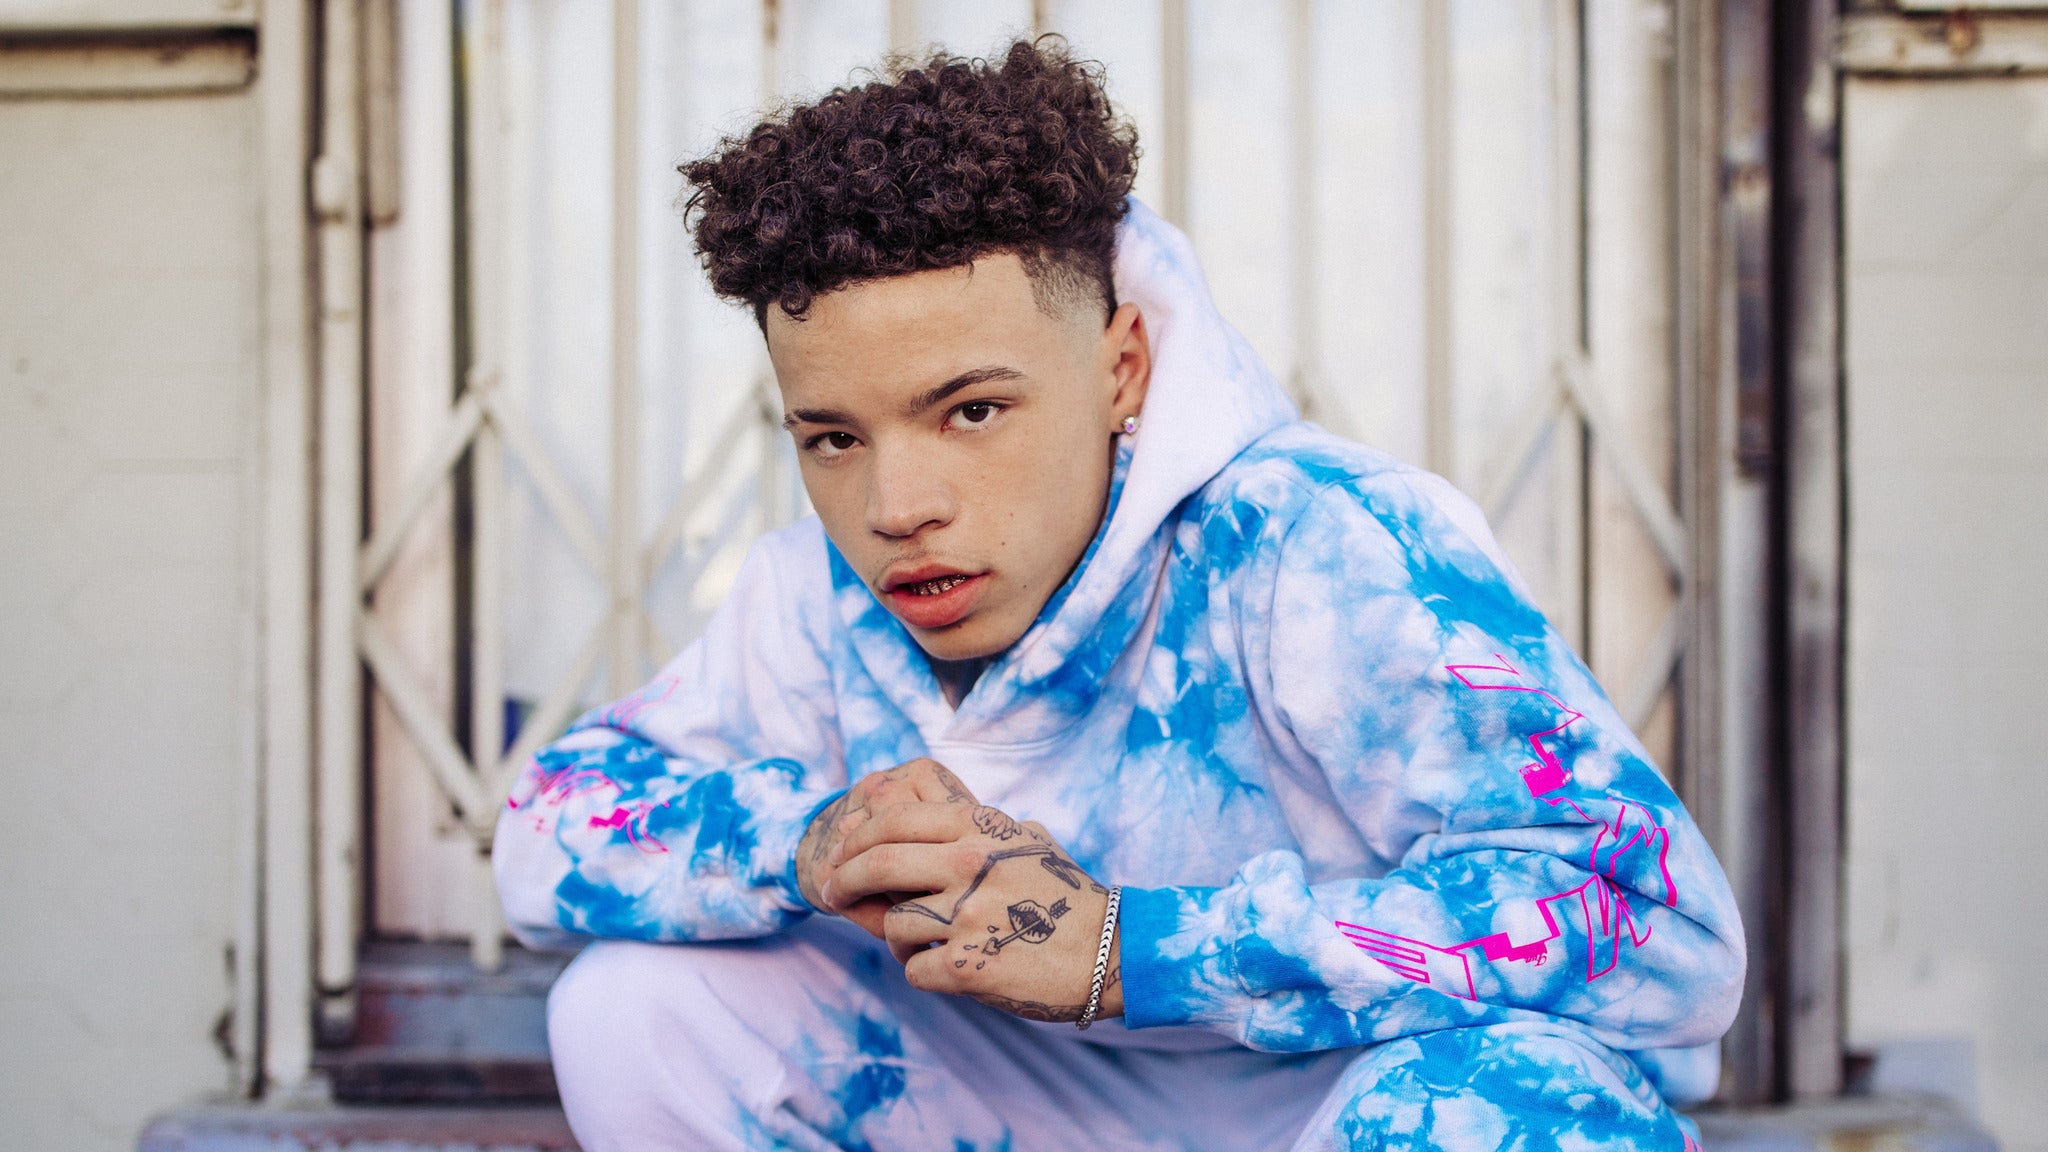 Lil Mosey - Certified Hitmaker North American Tour 2020 in Silver Spring promo photo for VIP Package presale offer code